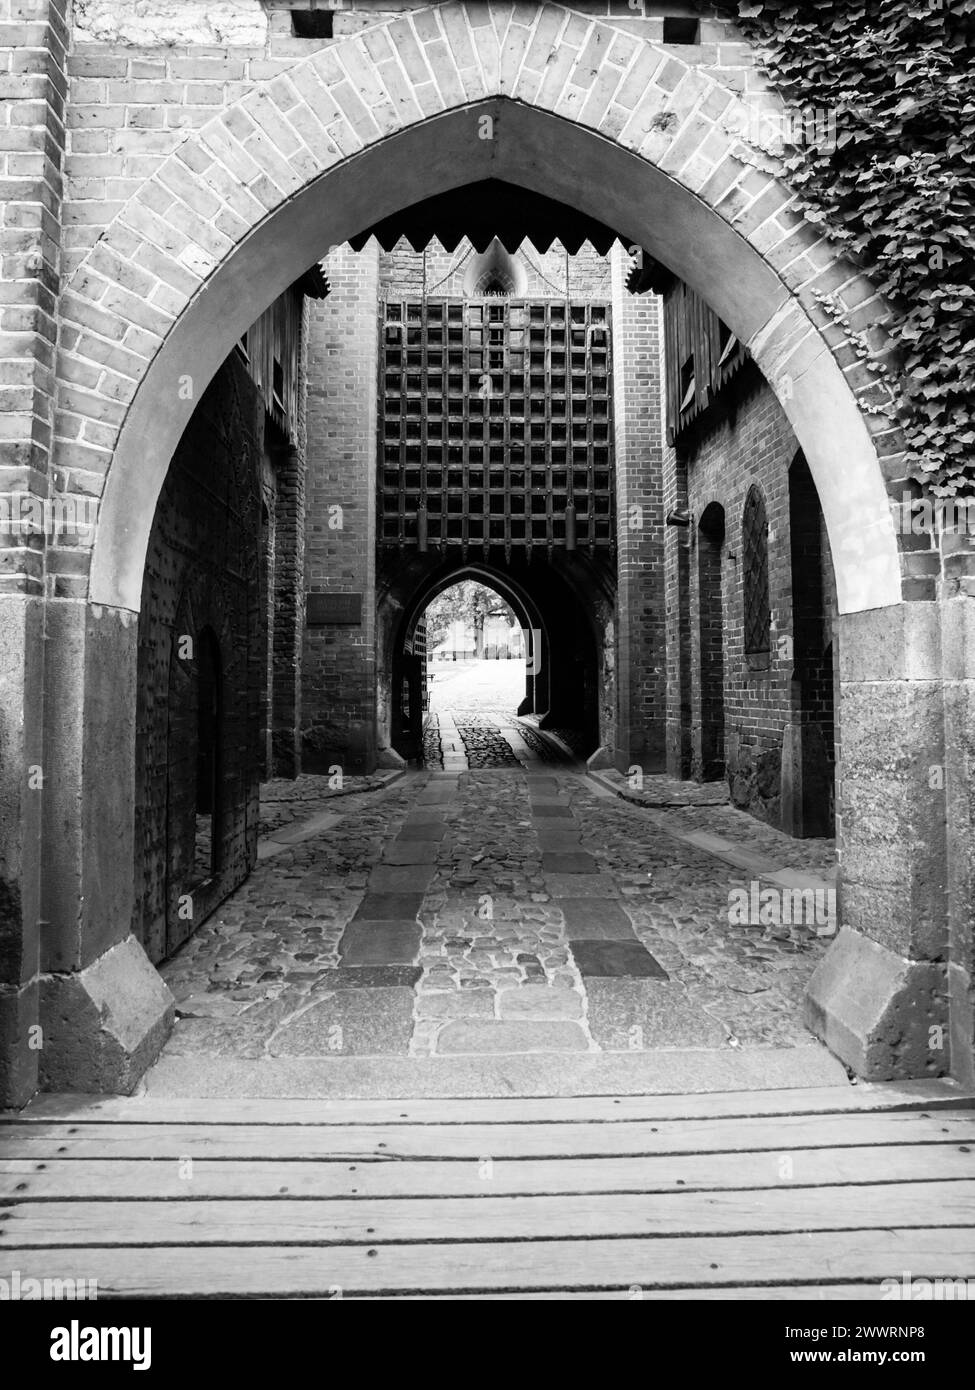 Medieval castle gate with iron bars. Black and white image. Stock Photo